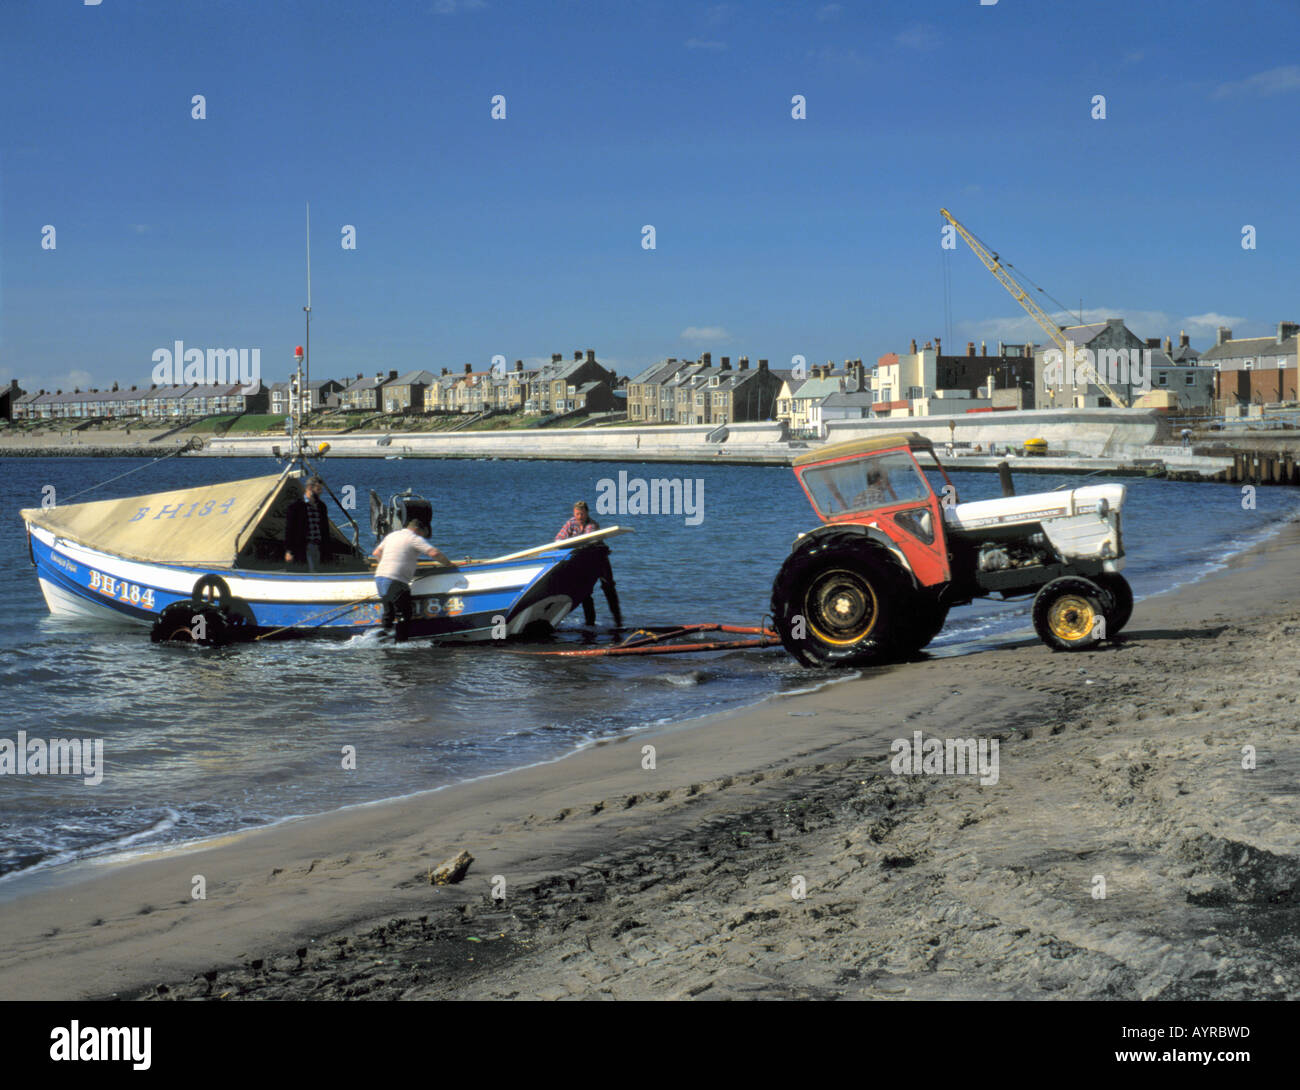 Loading a traditional wooden coble fishing boat on to a trailer, Newbiggin-by-the-Sea, Northumberland, England, UK. Stock Photo